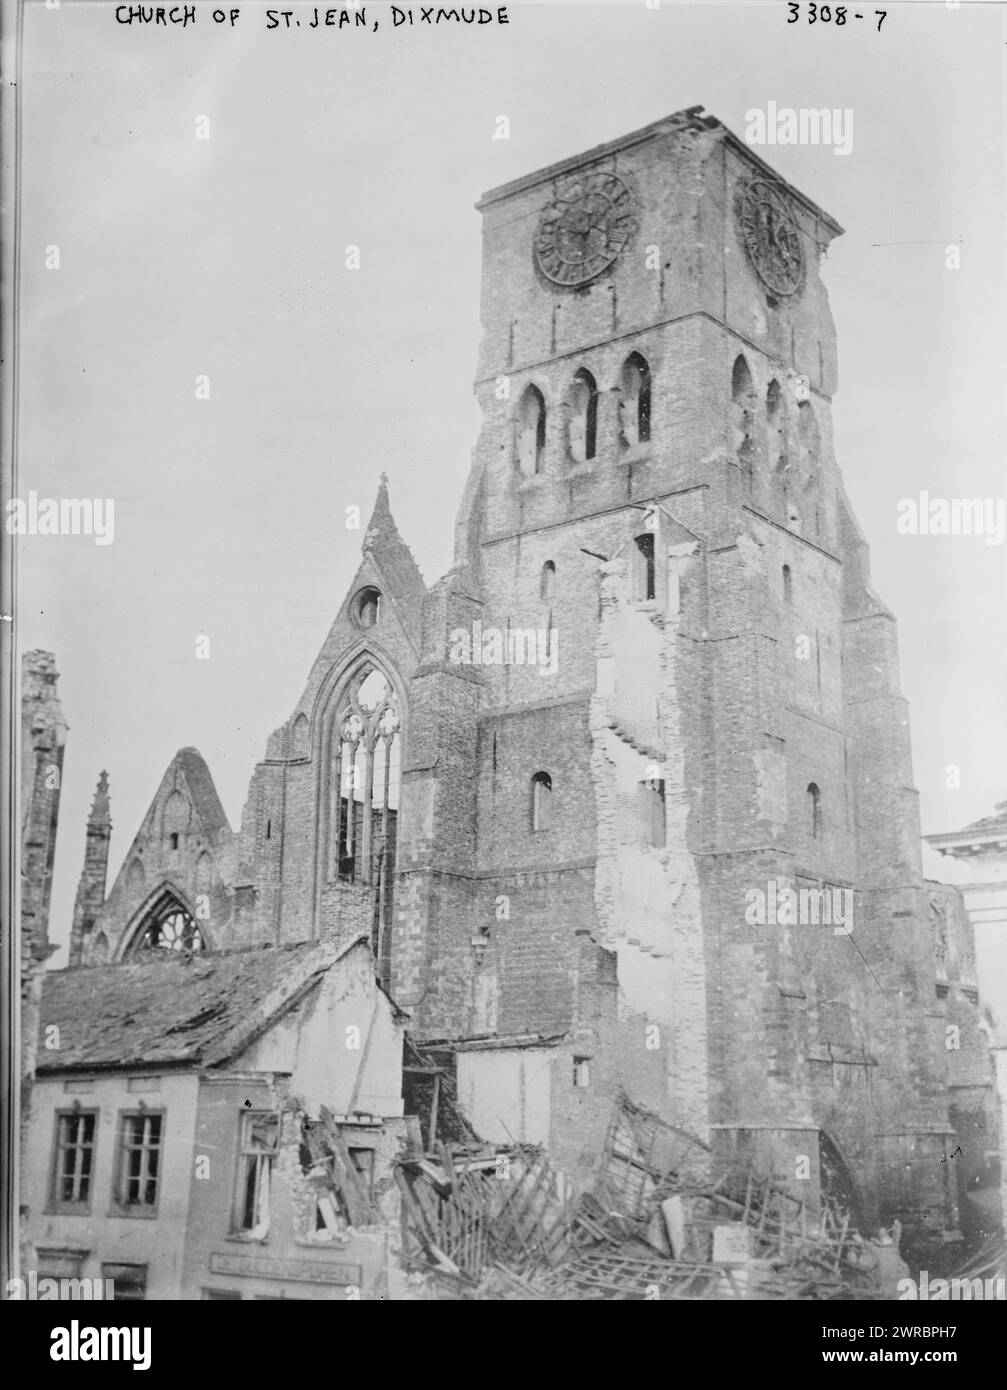 Church of St. Jean, Dixmude, Photograph shows the Church of St. Jean in Diksmuide (Dixmude), Belgium which was damaged during World War I., between ca. 1914 and ca. 1915, Dixmude, Glass negatives, 1 negative: glass Stock Photo